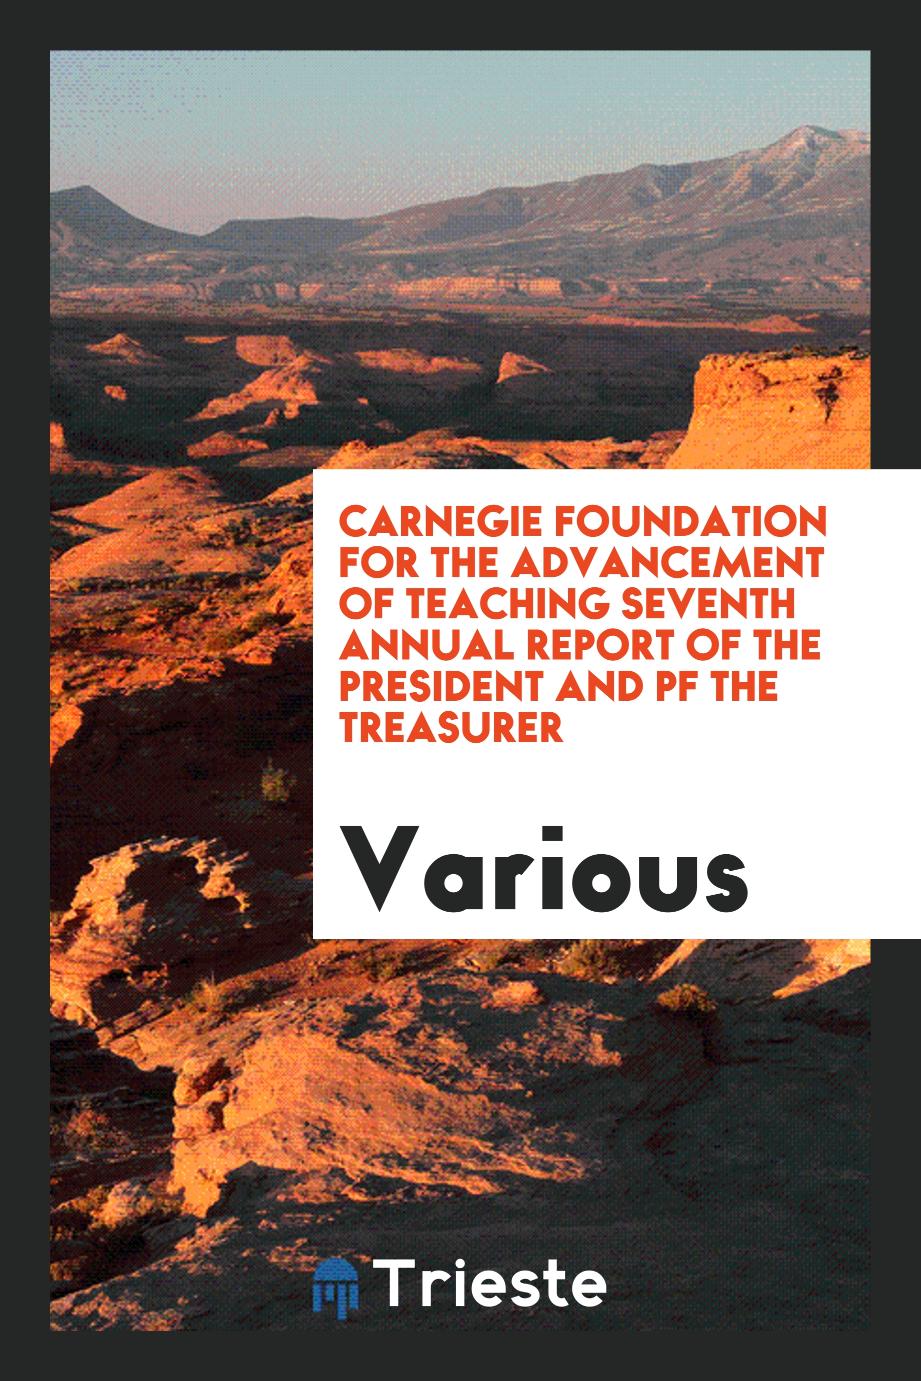 Carnegie Foundation for the Advancement of Teaching Seventh Annual report of the president and pf the treasurer